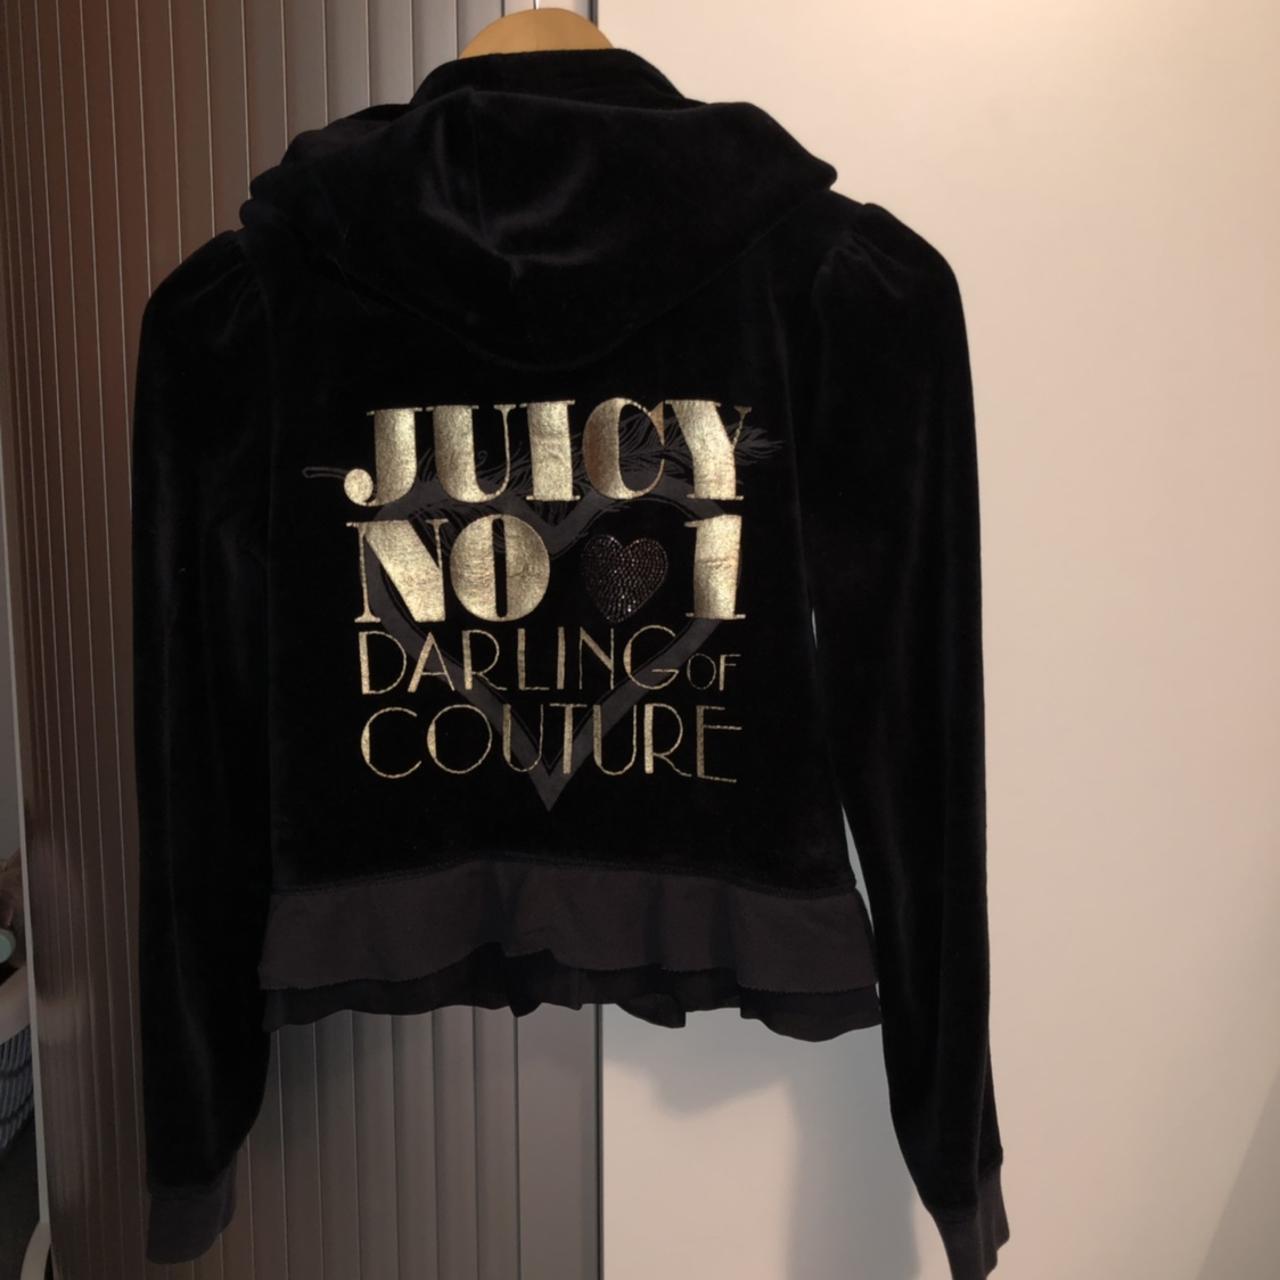 Juicy couture no1 darling of couture samt jacket - Depop